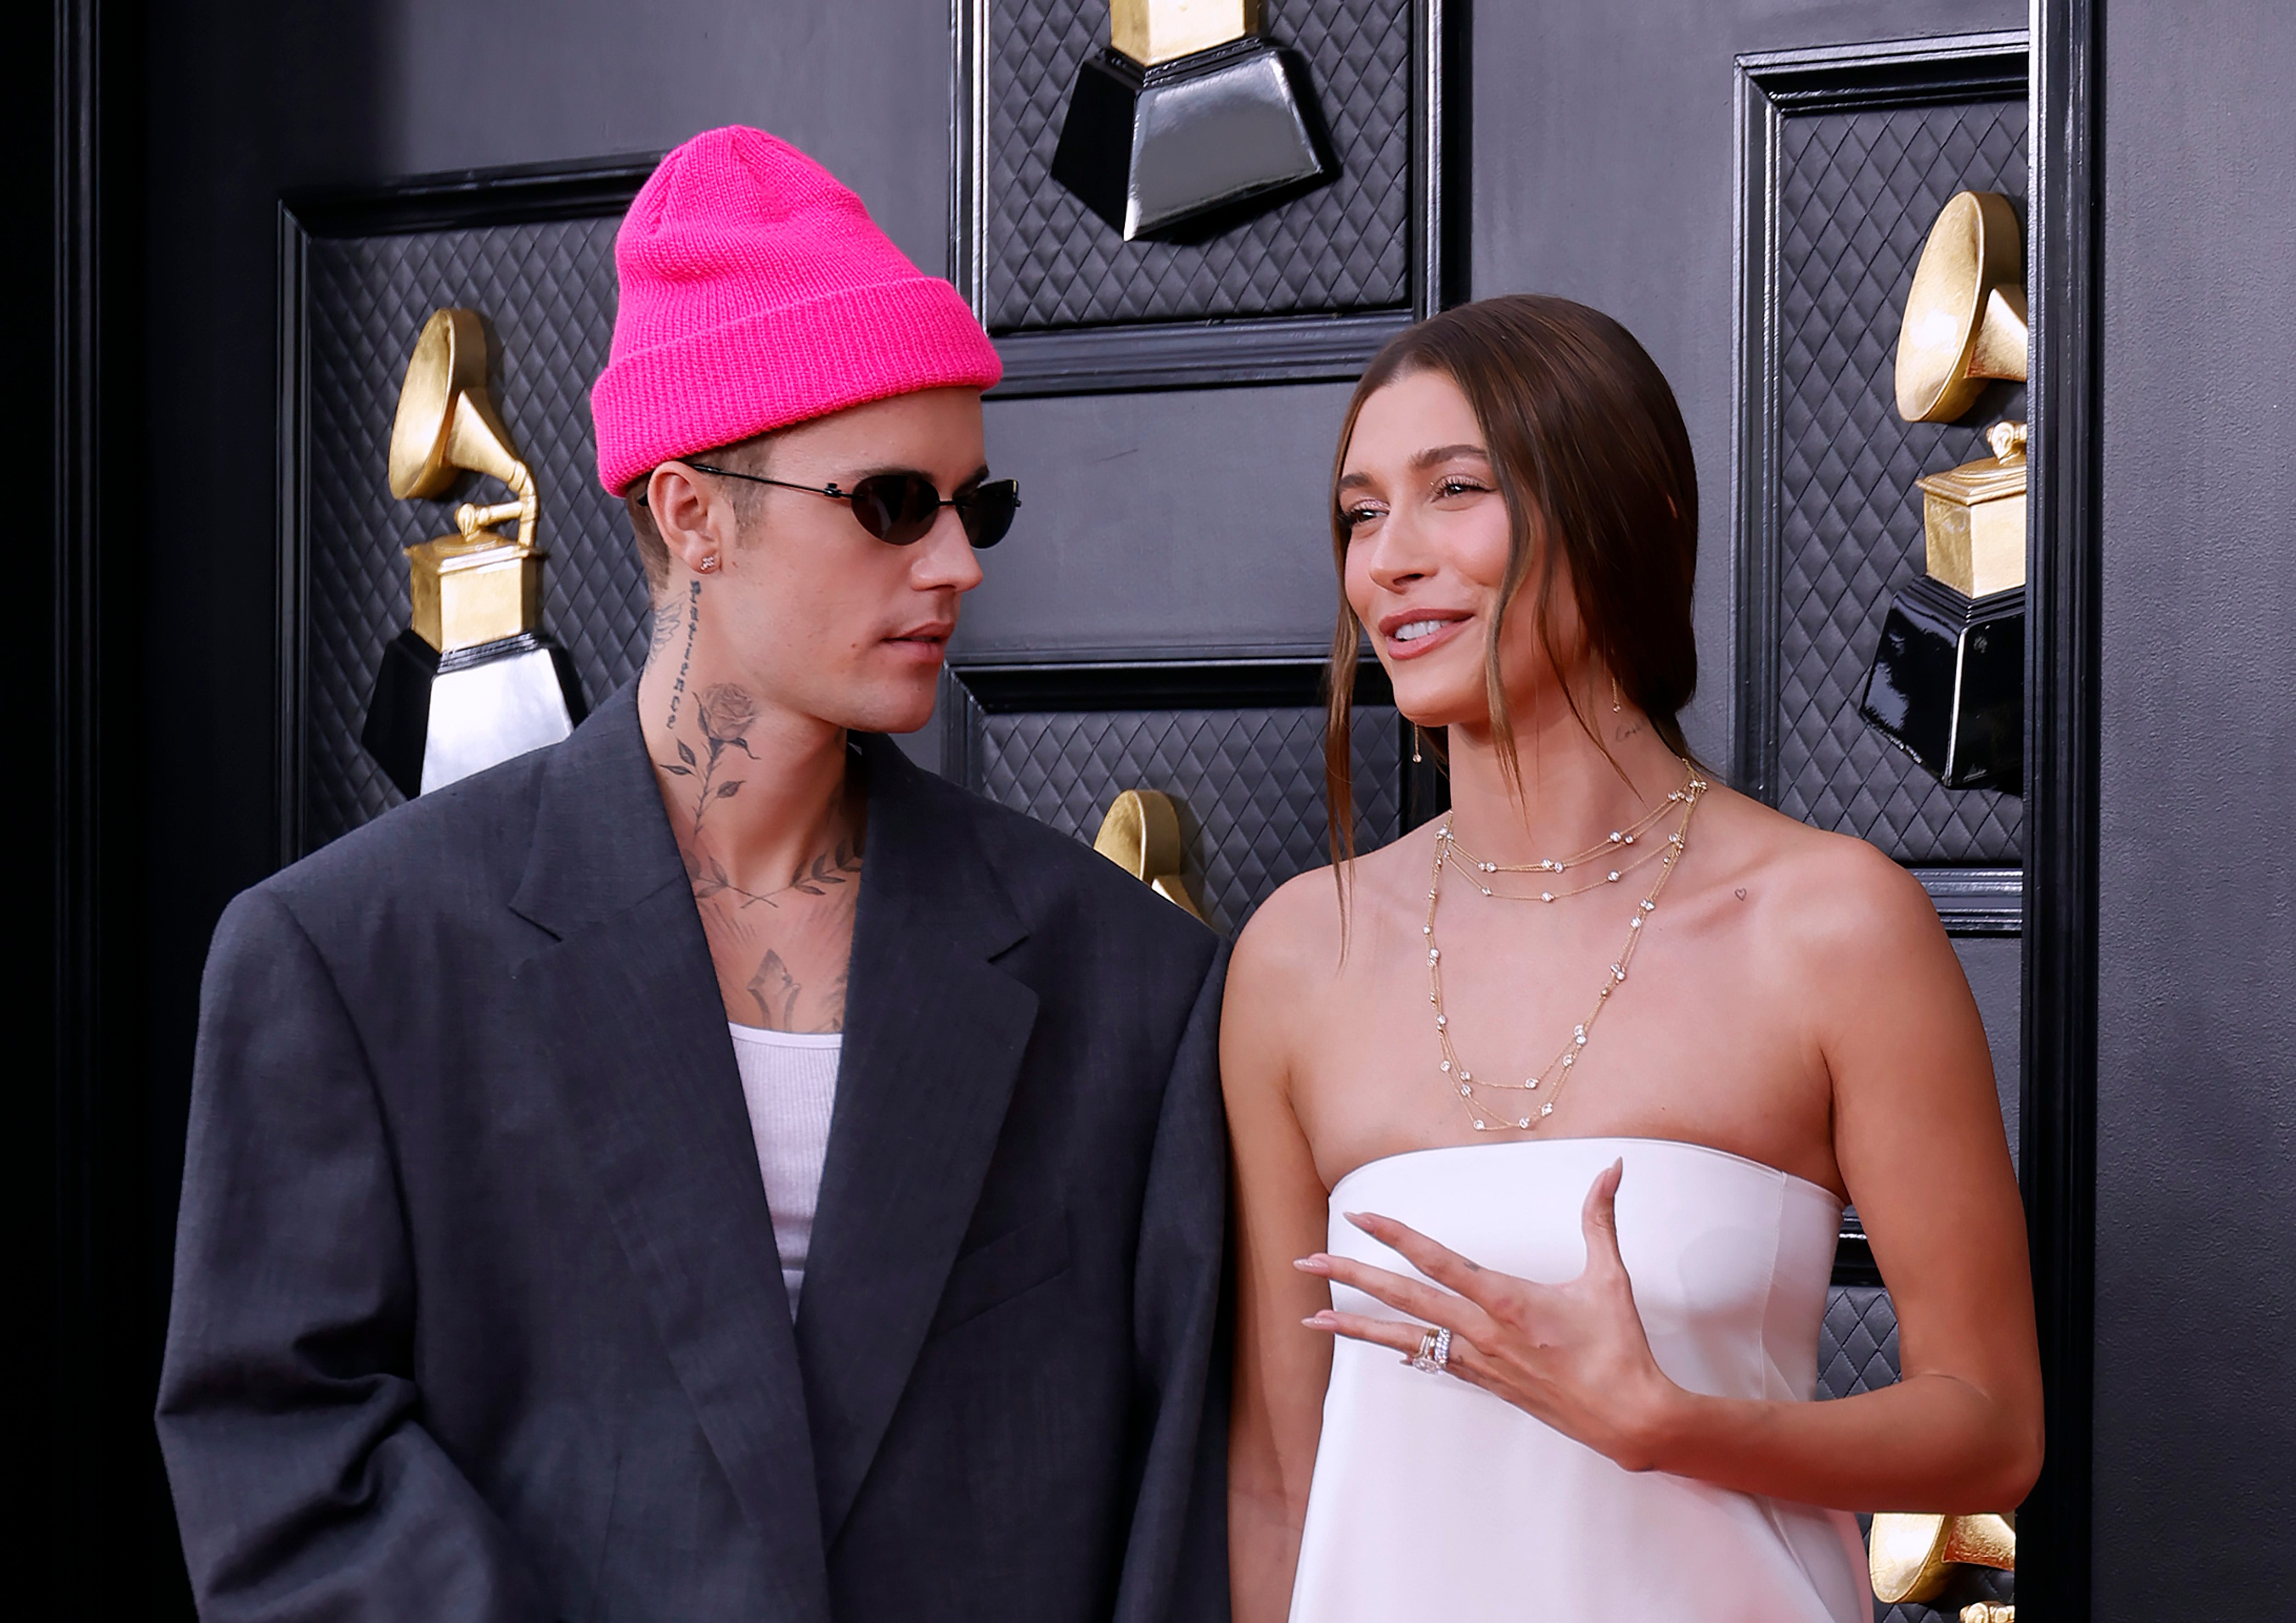 Justin Bieber interviews his entrepreneurial wife Hailey Bieber and tells  all about her vision